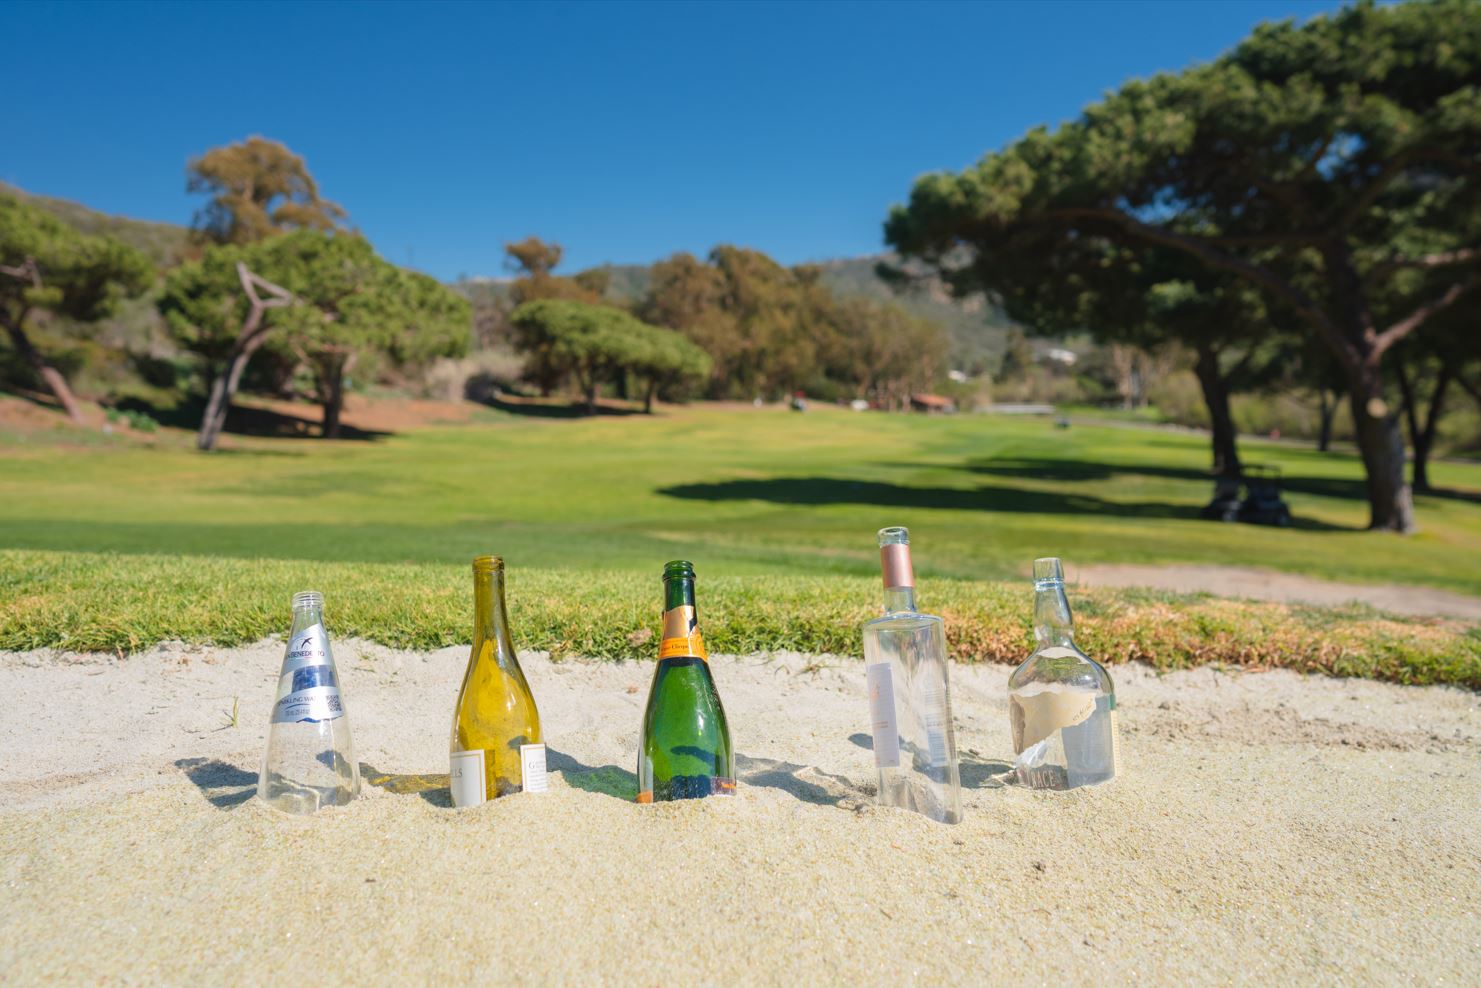 Bottles to Bunkers